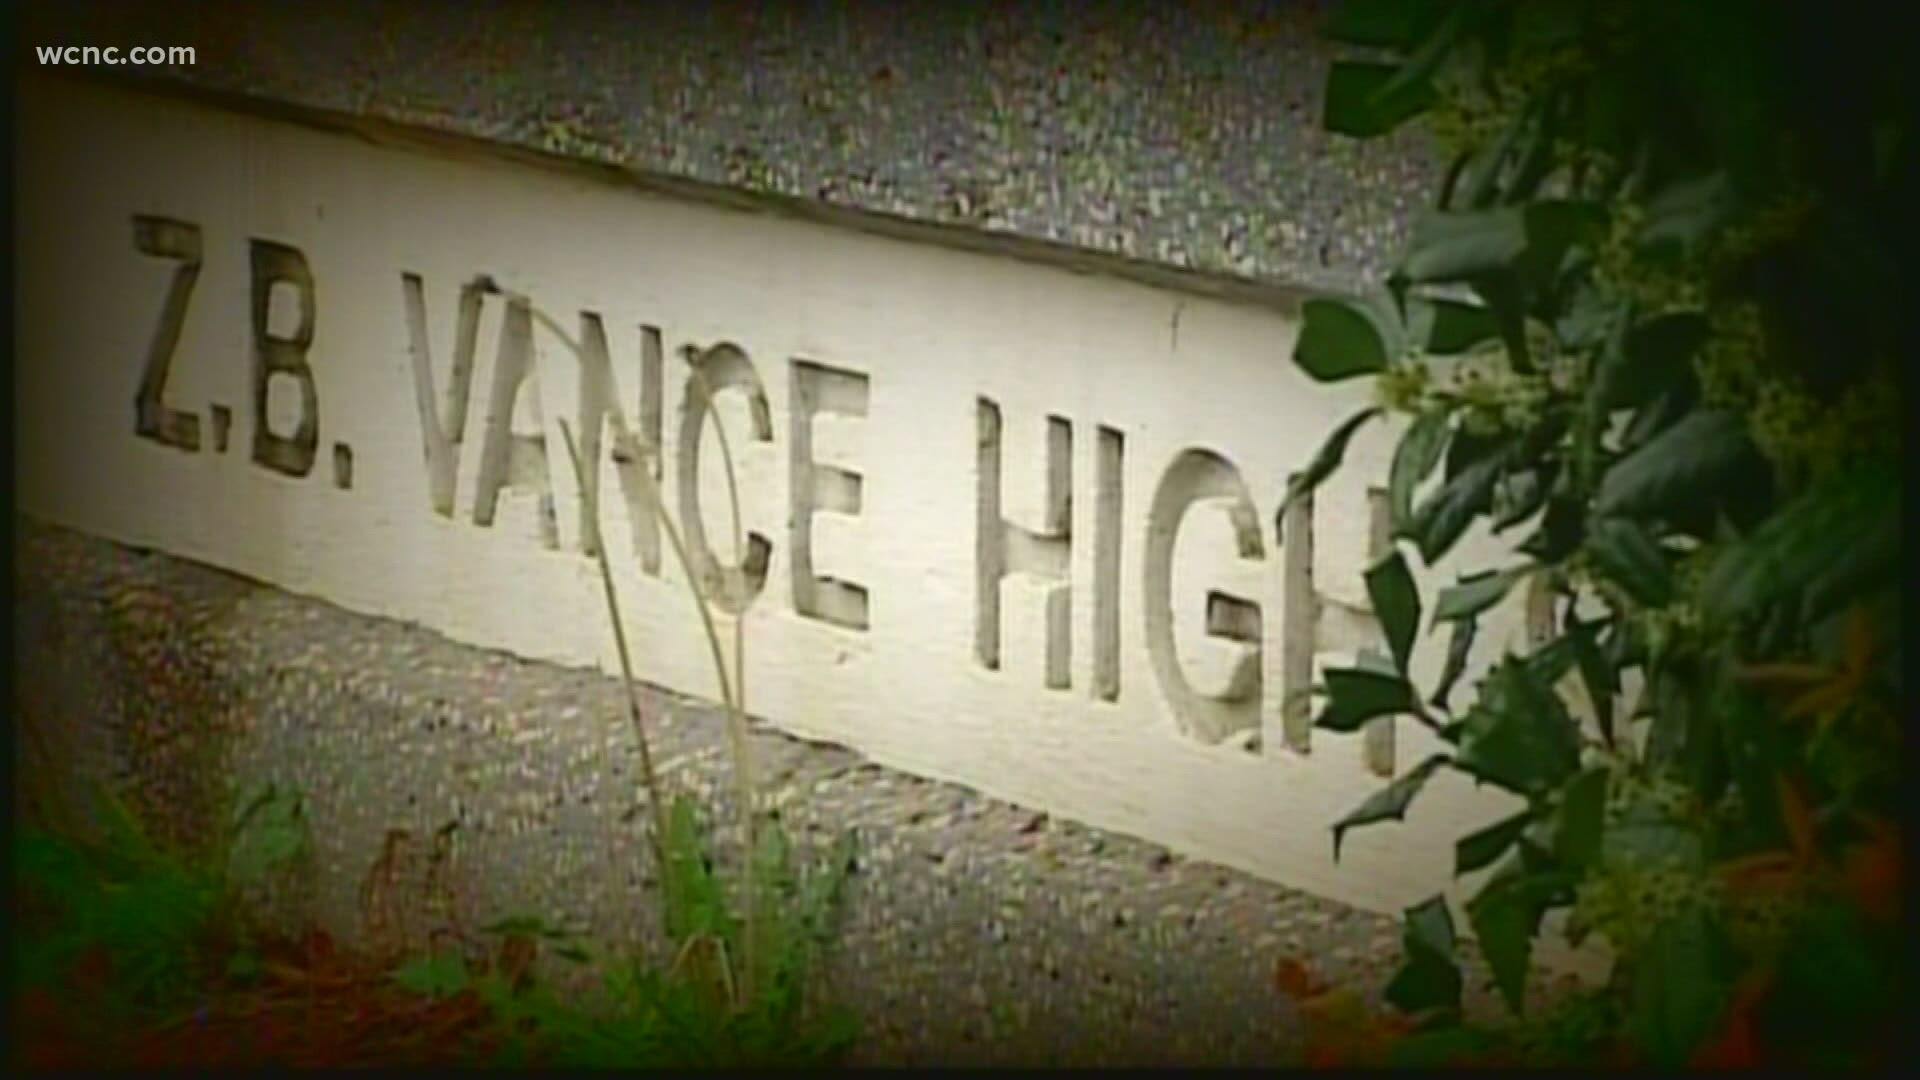 The Vance High School Cougars will no longer compete under the Vance name starting next season. Student-athletes and their coaches discussed the change.